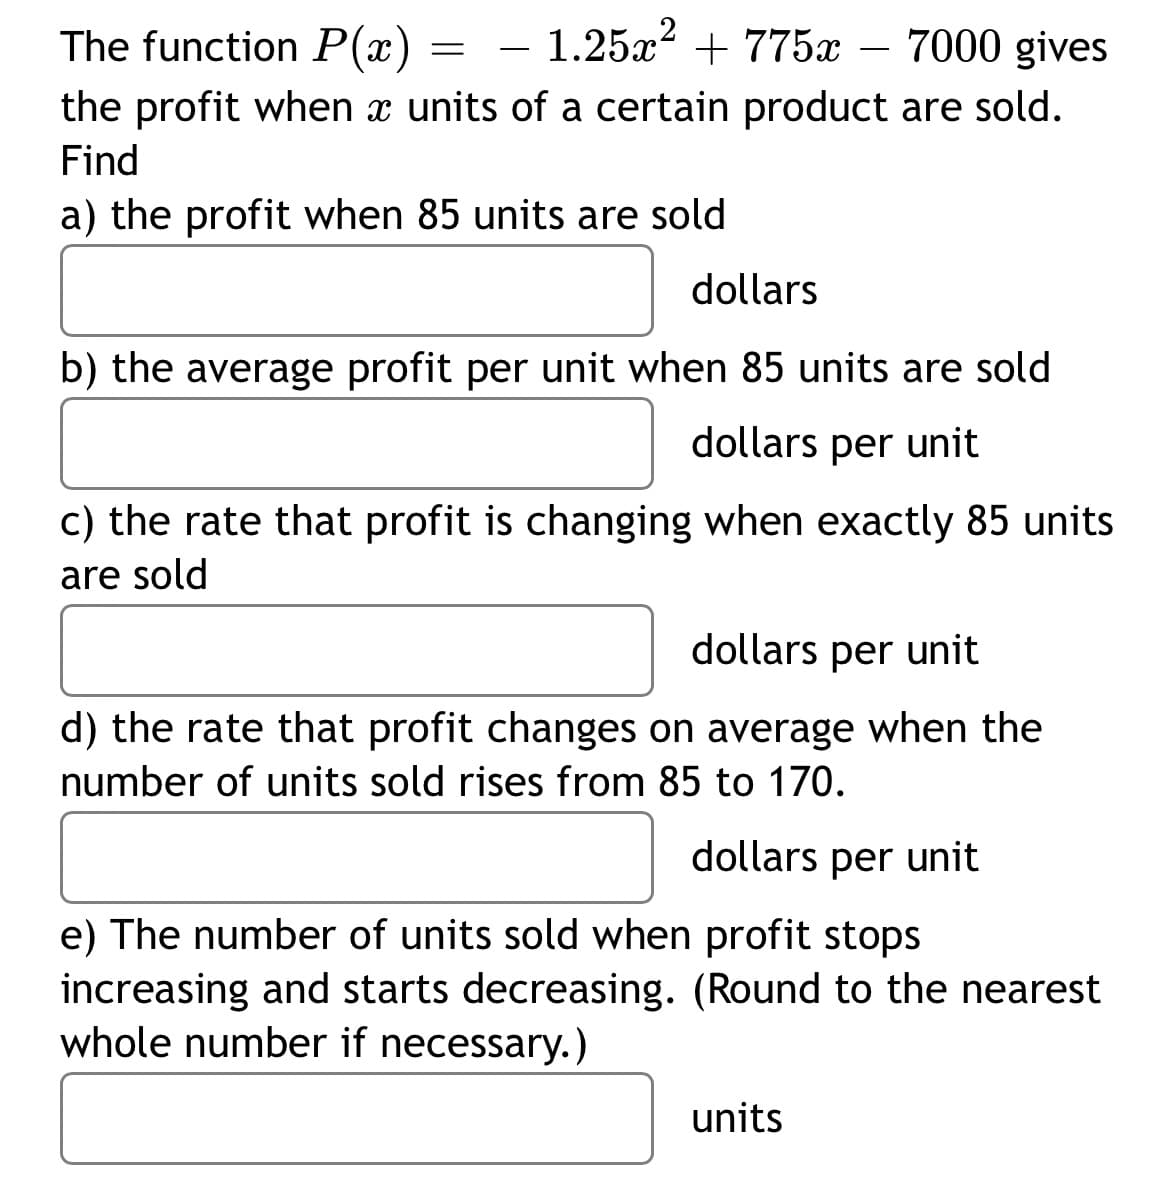 The function P(x) - 1.25x² + 775x - 7000 gives
the profit when x units of a certain product are sold.
Find
a) the profit when 85 units are sold
=
dollars
b) the average profit per unit when 85 units are sold
dollars per unit
c) the rate that profit is changing when exactly 85 units
are sold
dollars per unit
d) the rate that profit changes on average when the
number of units sold rises from 85 to 170.
dollars per unit
e) The number of units sold when profit stops
increasing and starts decreasing. (Round to the nearest
whole number if necessary.)
units